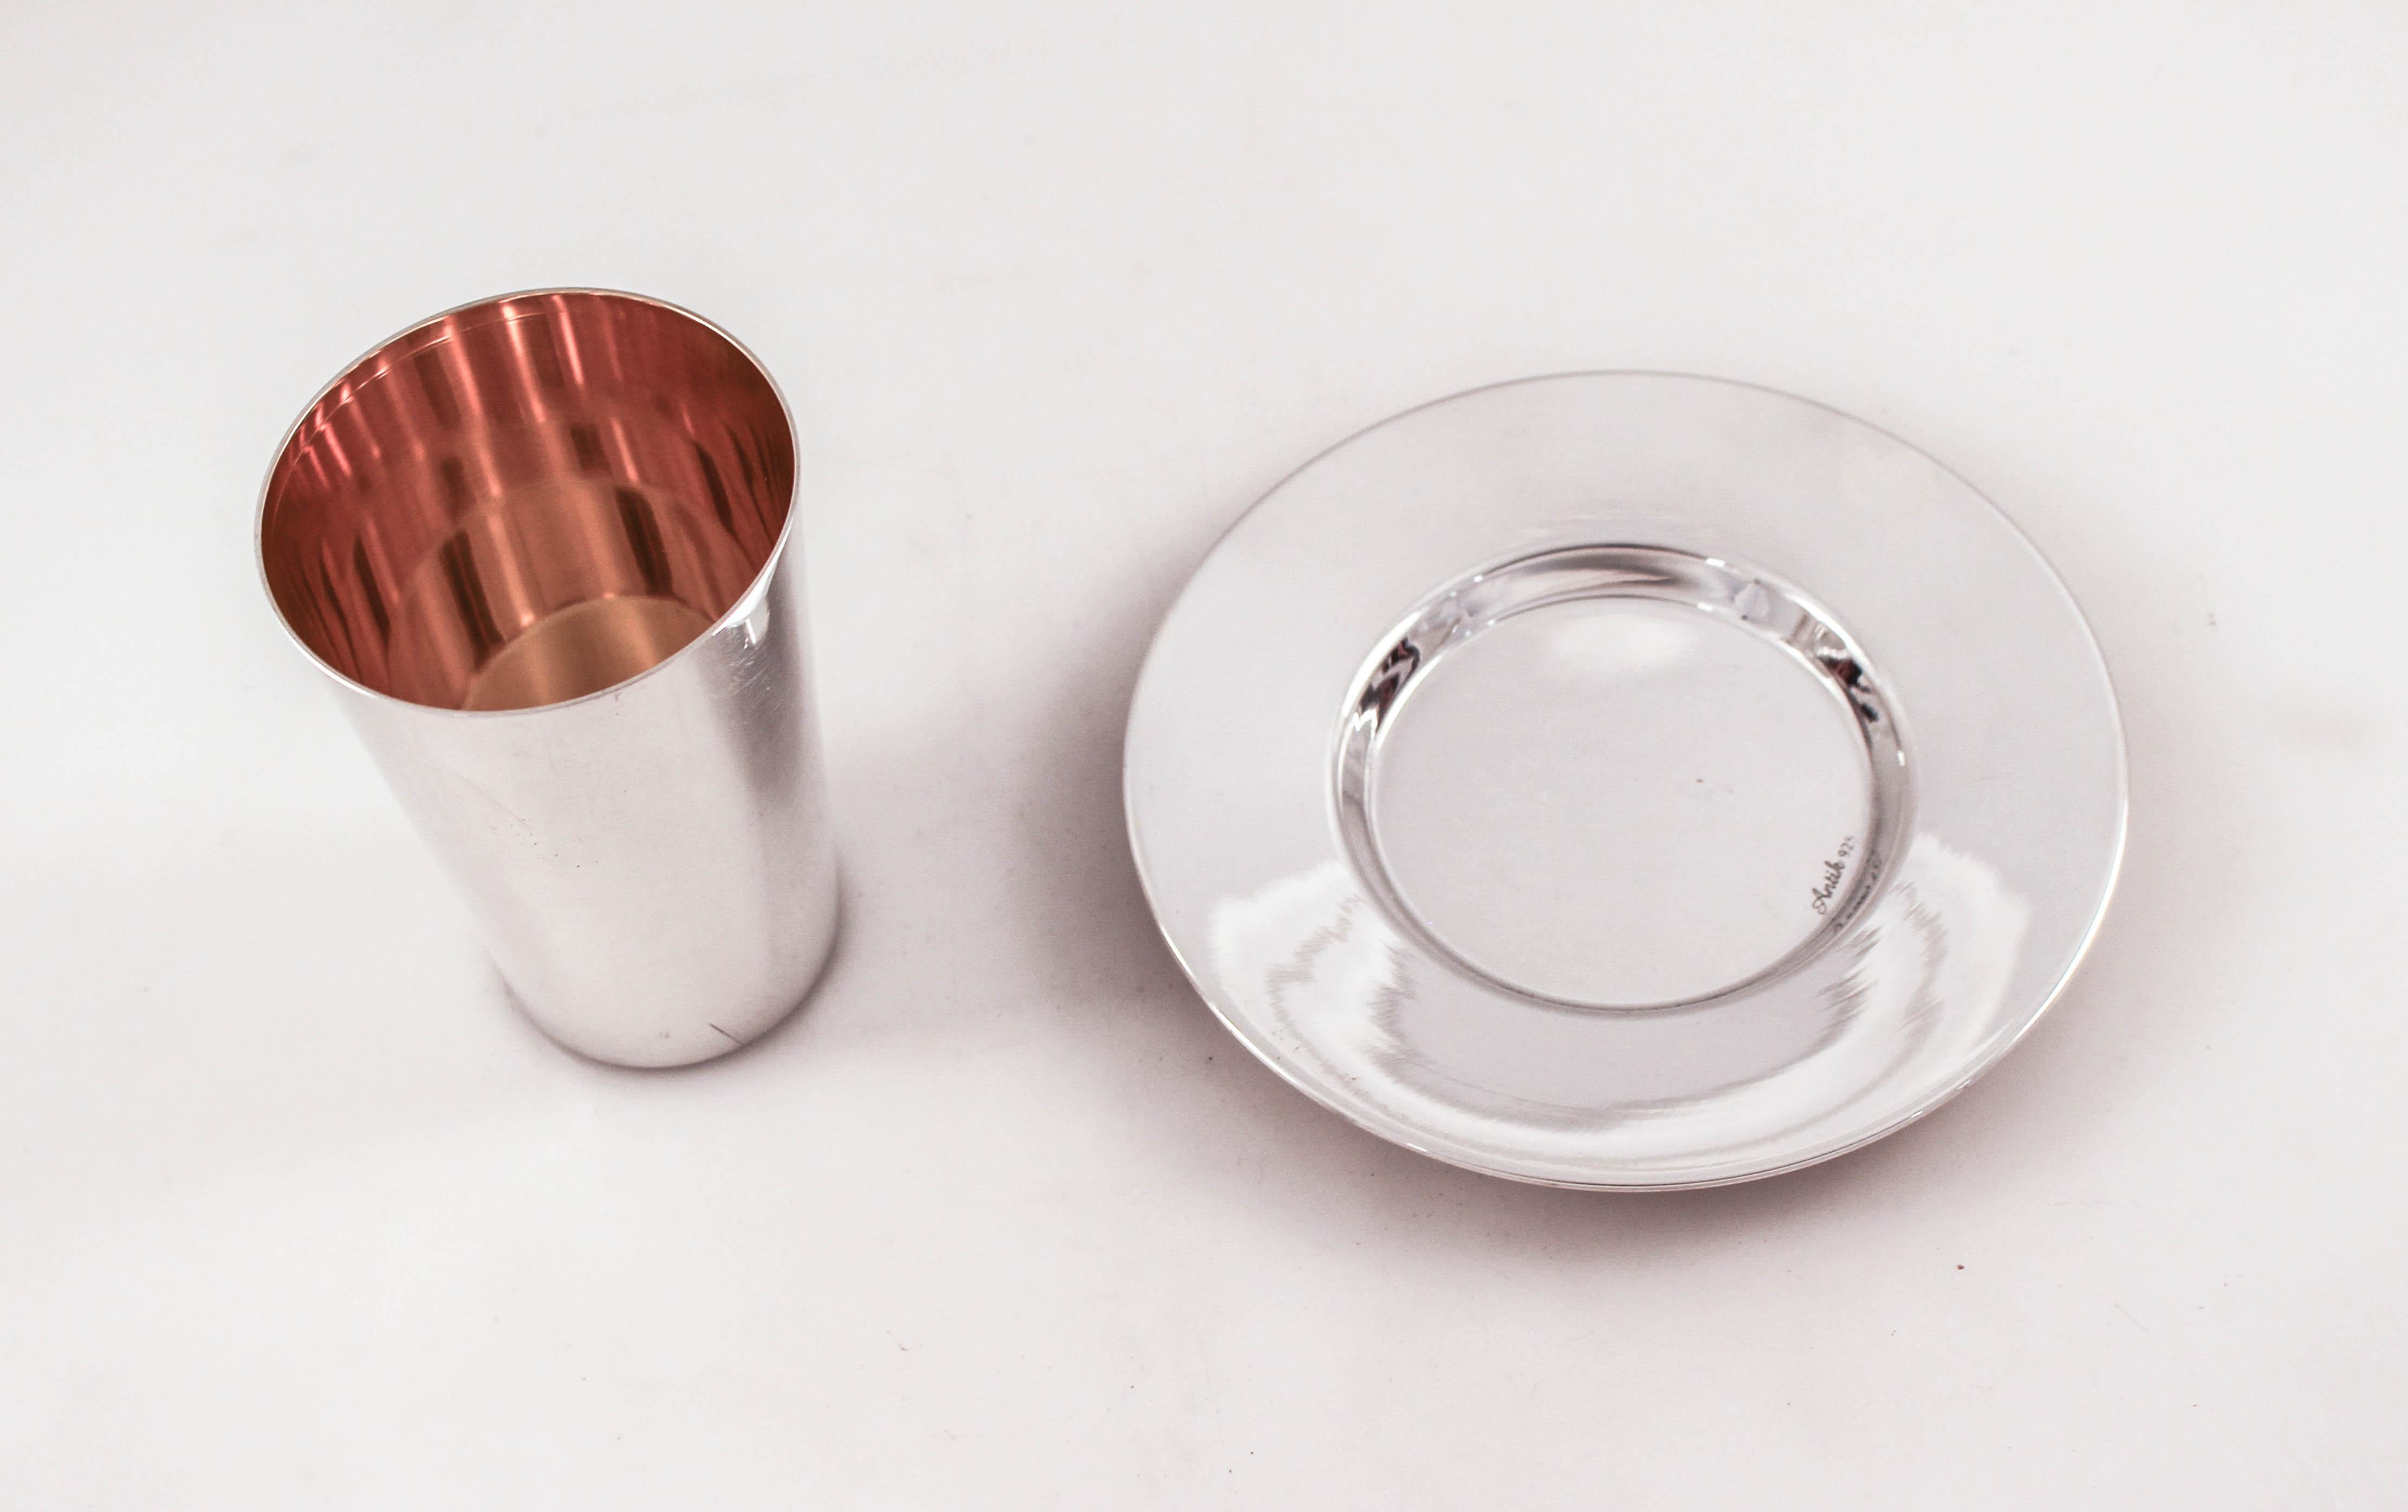 An Uber modern sterling silver Kiddush cup and matching plate. The set is sleek, without all the etchings and casting usually found on Judaica. So go ahead and carry on those thousand year old traditions but do it in a modern cup and plate.